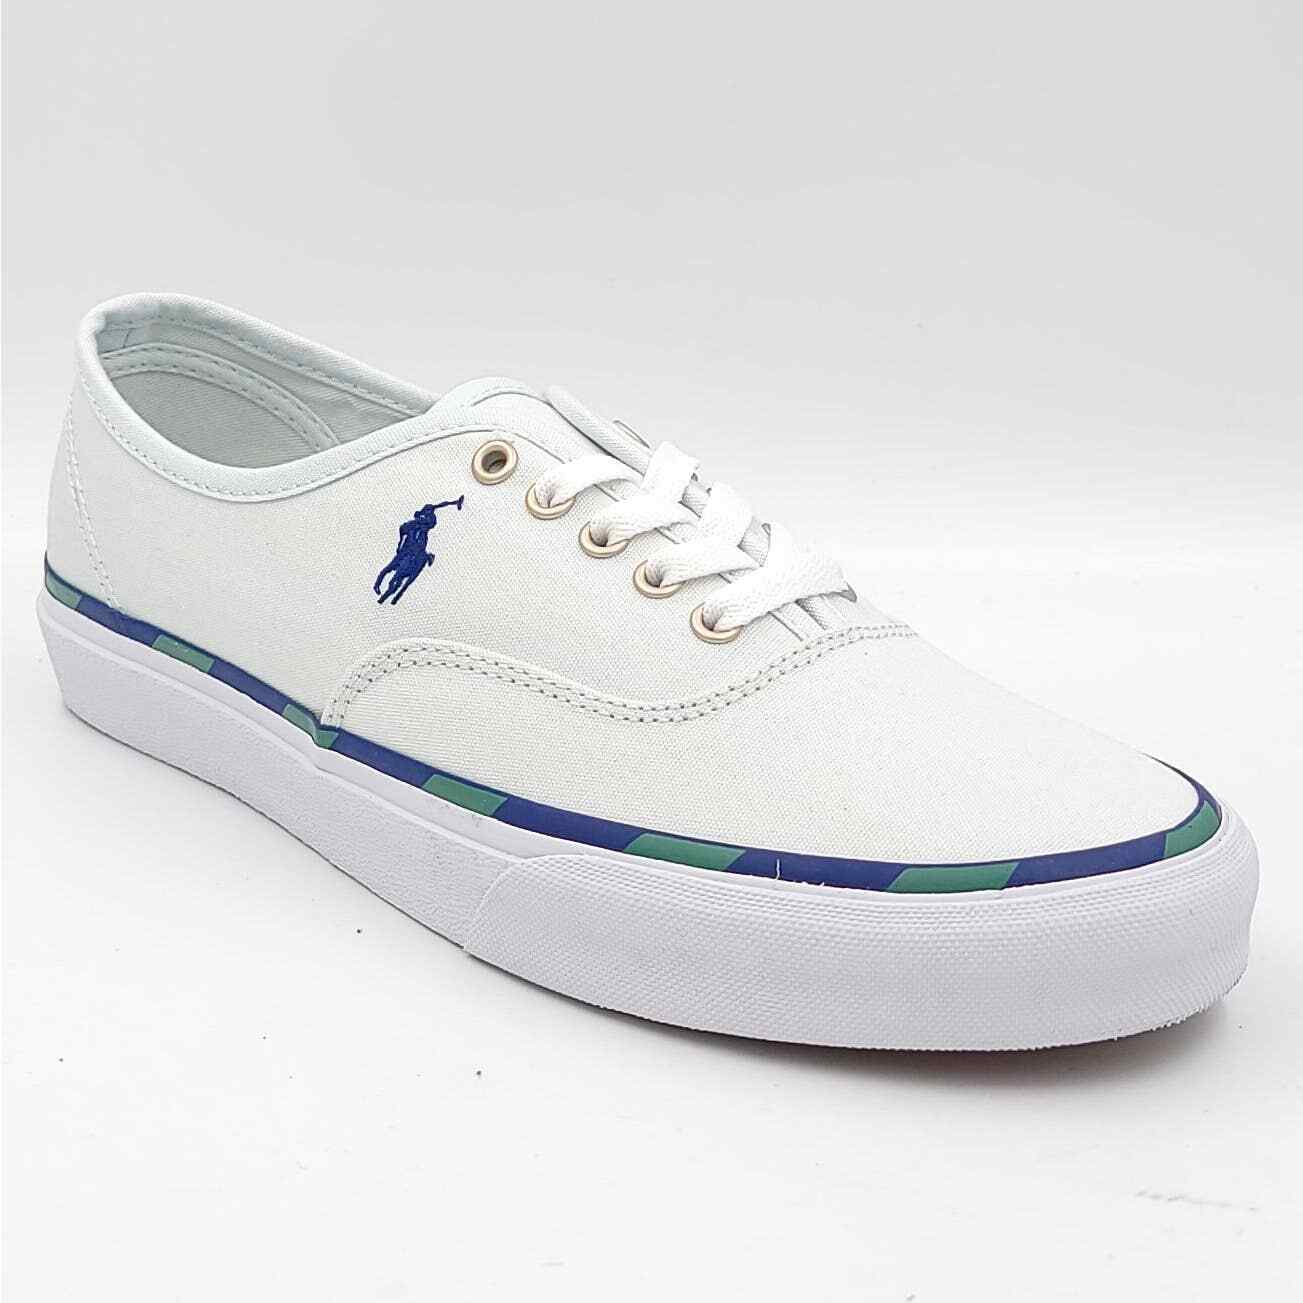 Primary image for Polo Ralph Lauren Men Low Top Sneakers Keaton Pony Size US 8D Light Blue Canvas